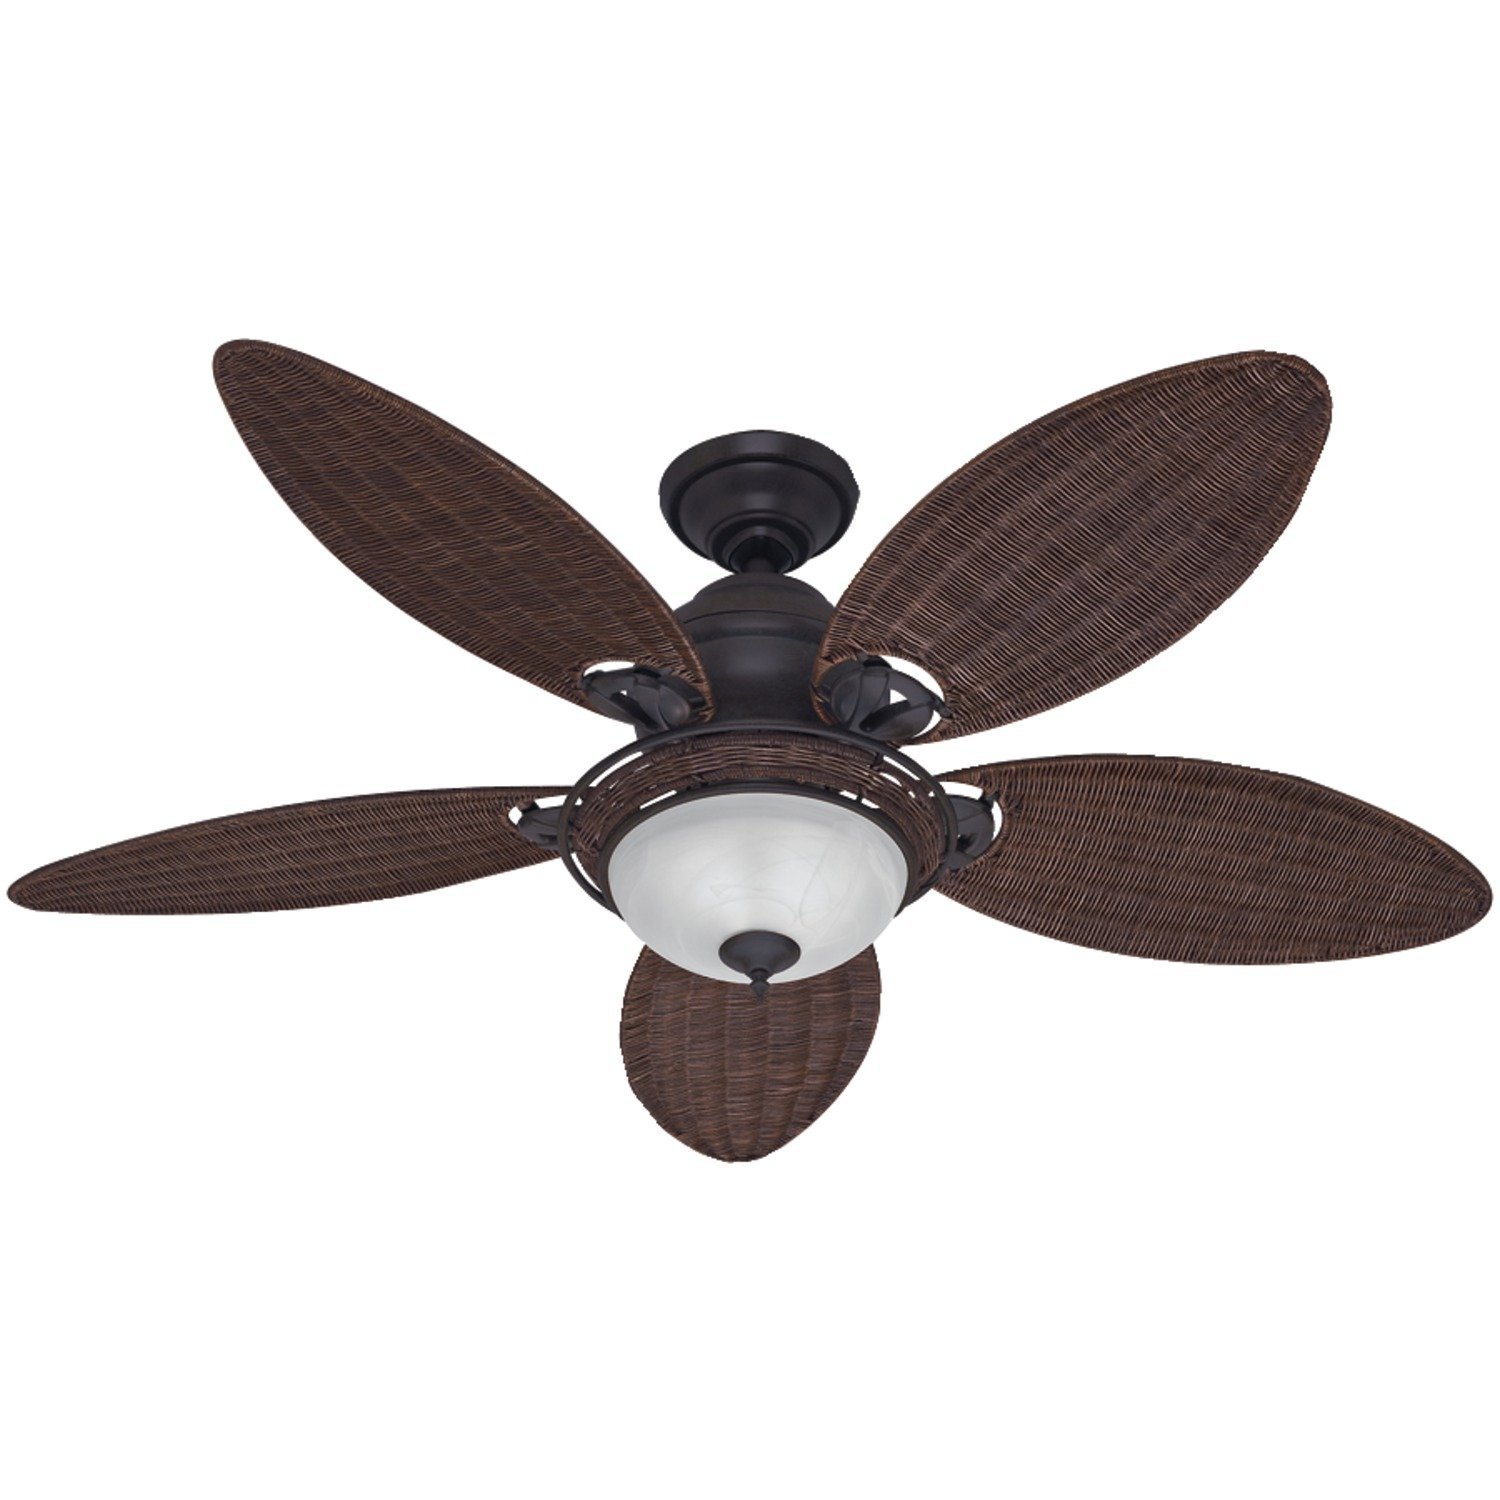 Hunter Fan Company 54095 Caribbean Breeze 54-Inch Ceiling Fan with Five Antique Dark Wicker Blades and Light Kit, Weathered Bronze